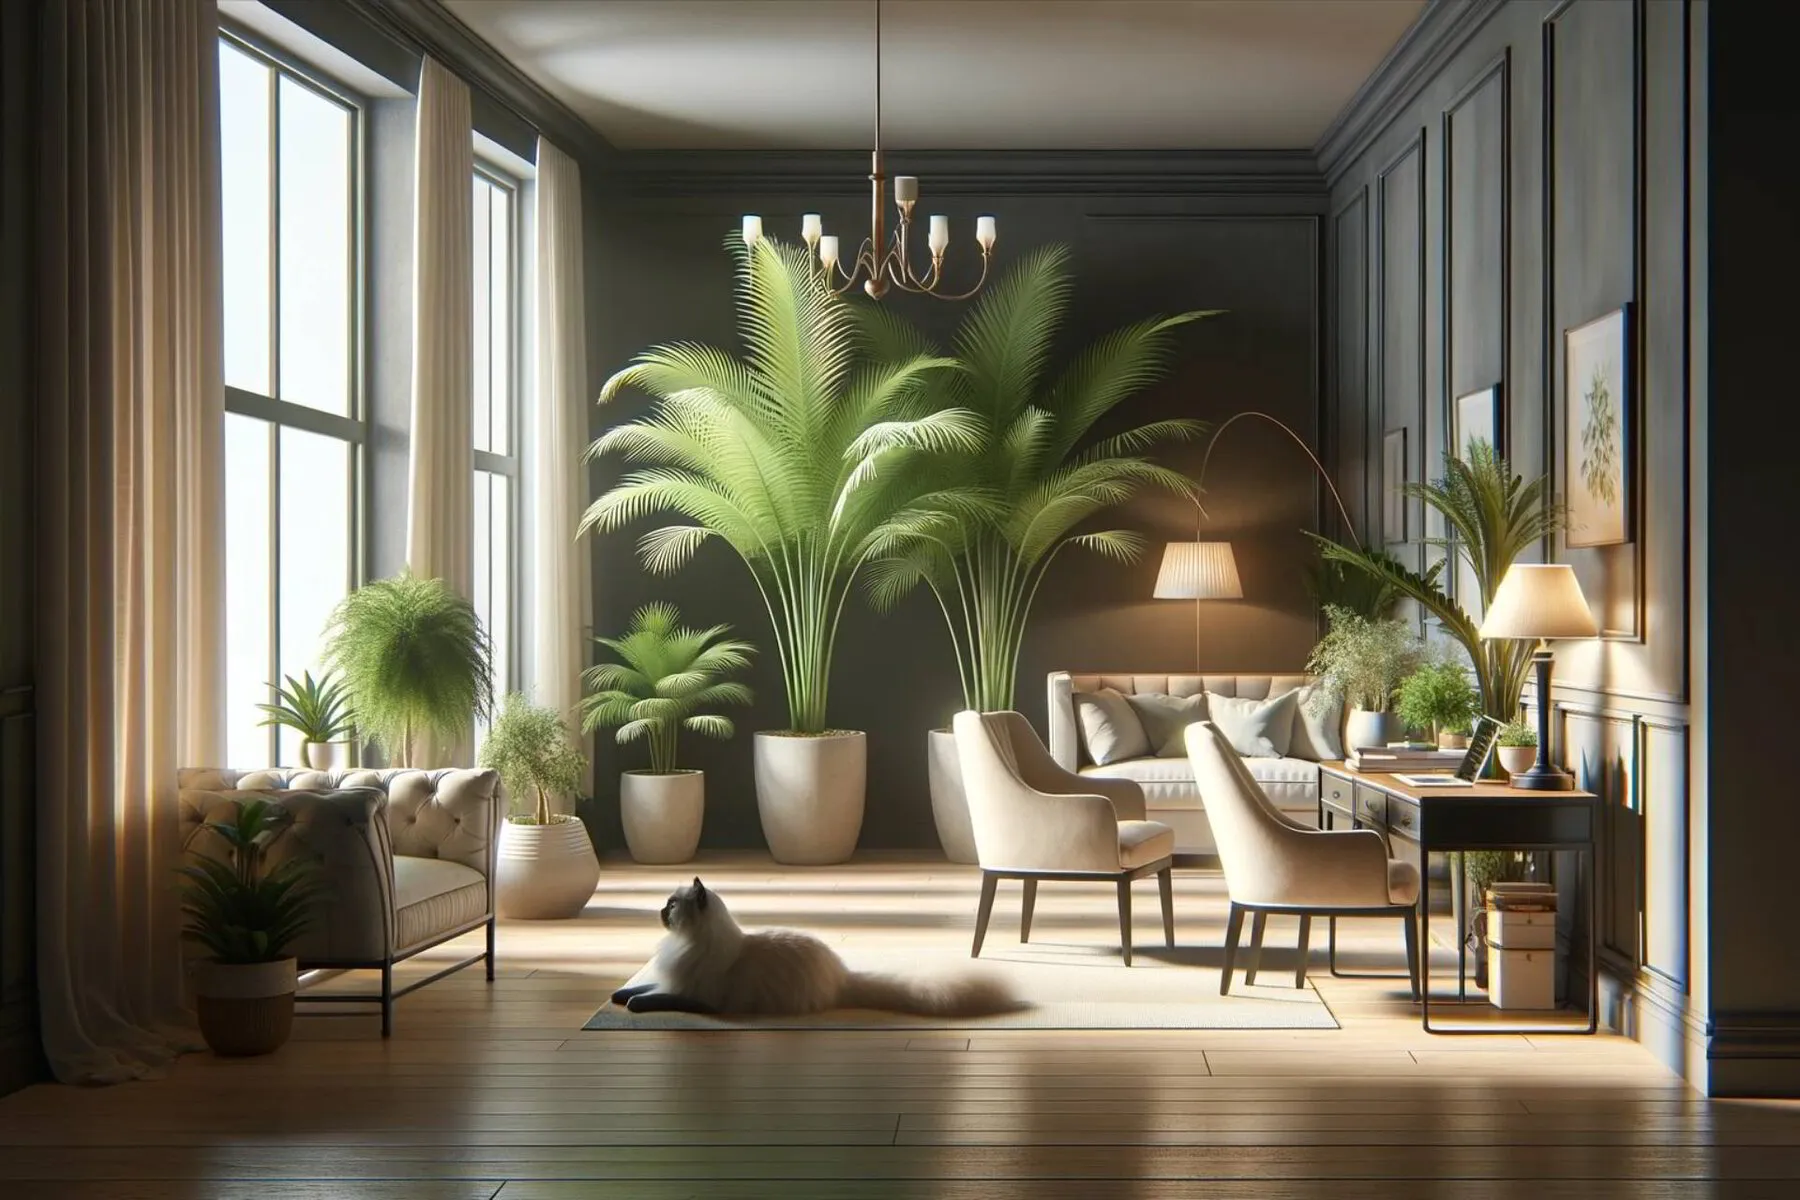 serene and elegant scene depicting parlor palms in a home setting